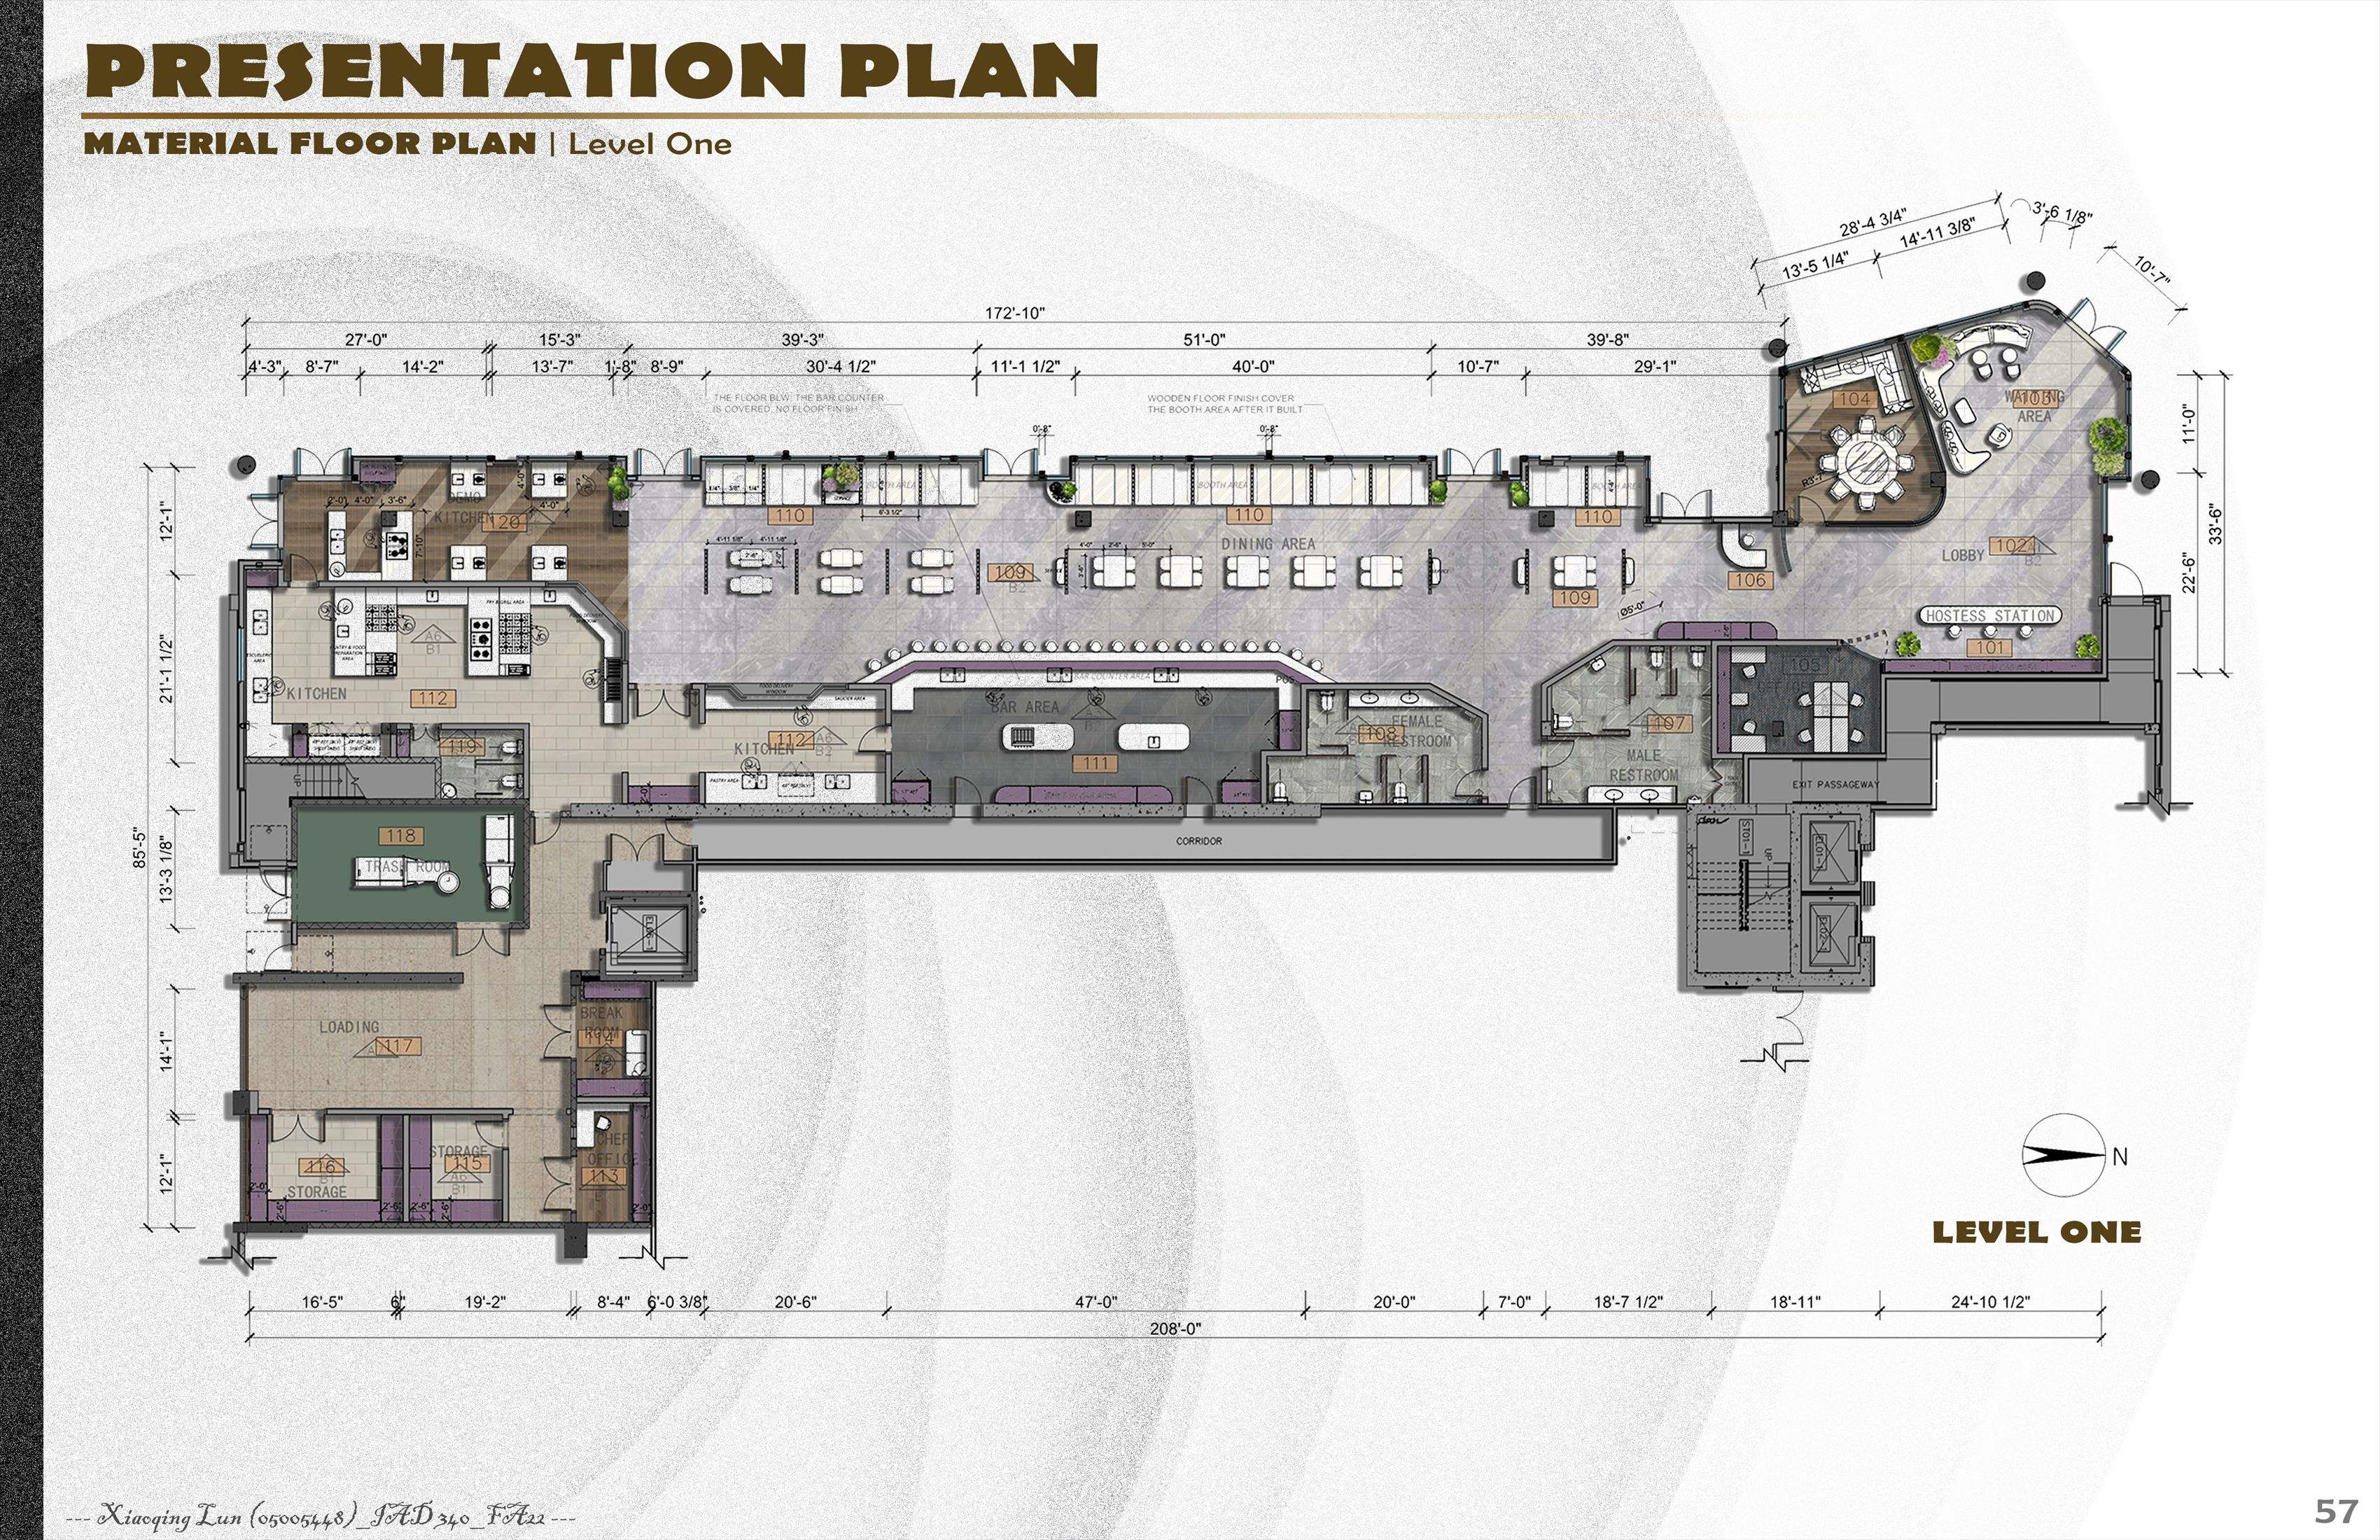 Ultimate Freshness Farm-to-Table Restaurant 05_Floor Plan & Elevation - page 2